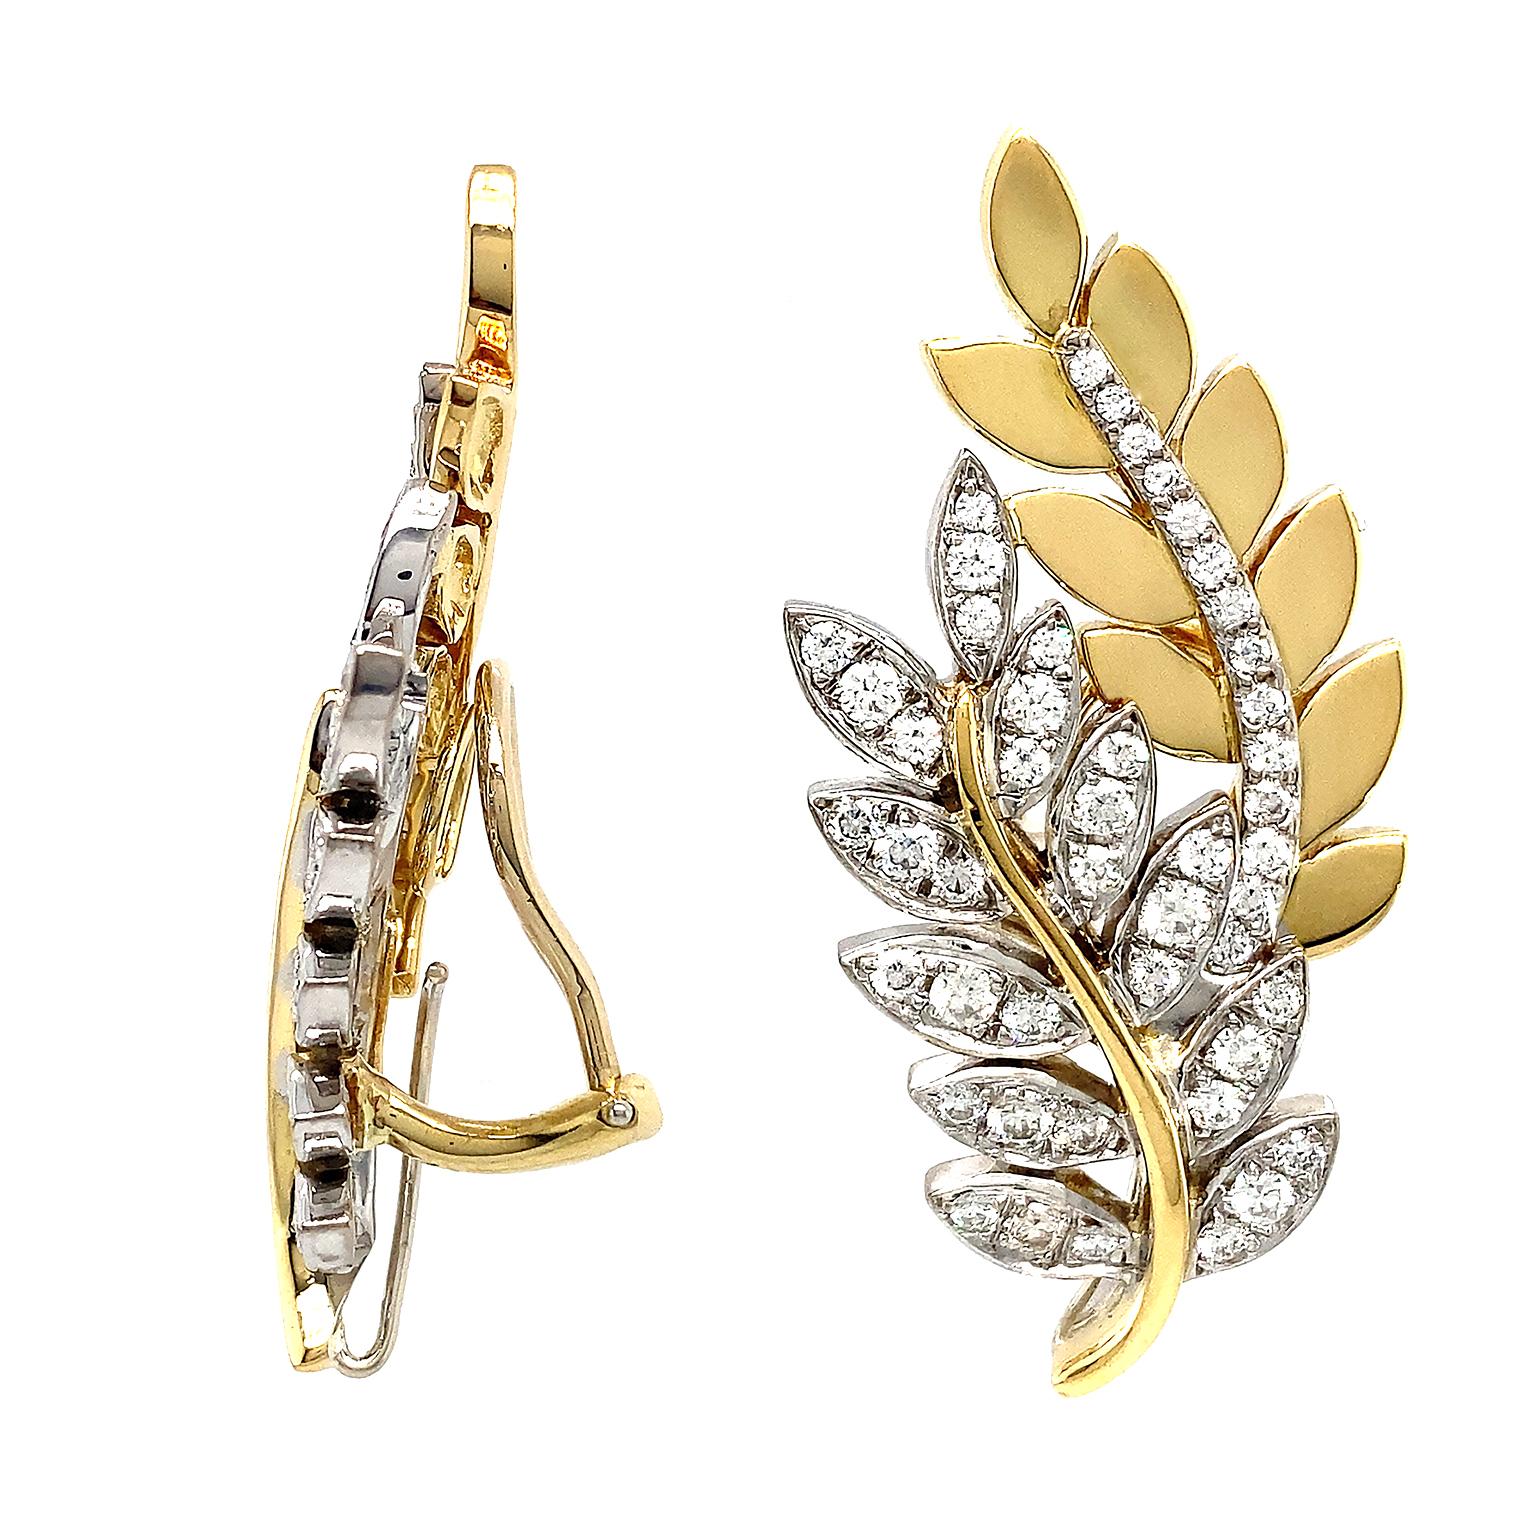 Diamonds and gold give life to the motif of Olympia leaves for these earrings. 18k yellow gold forms the leaves of the bough in the back. Brilliant cut diamonds set in palladium glimmer as the midrib. The front bough has brilliant cut diamond leaves